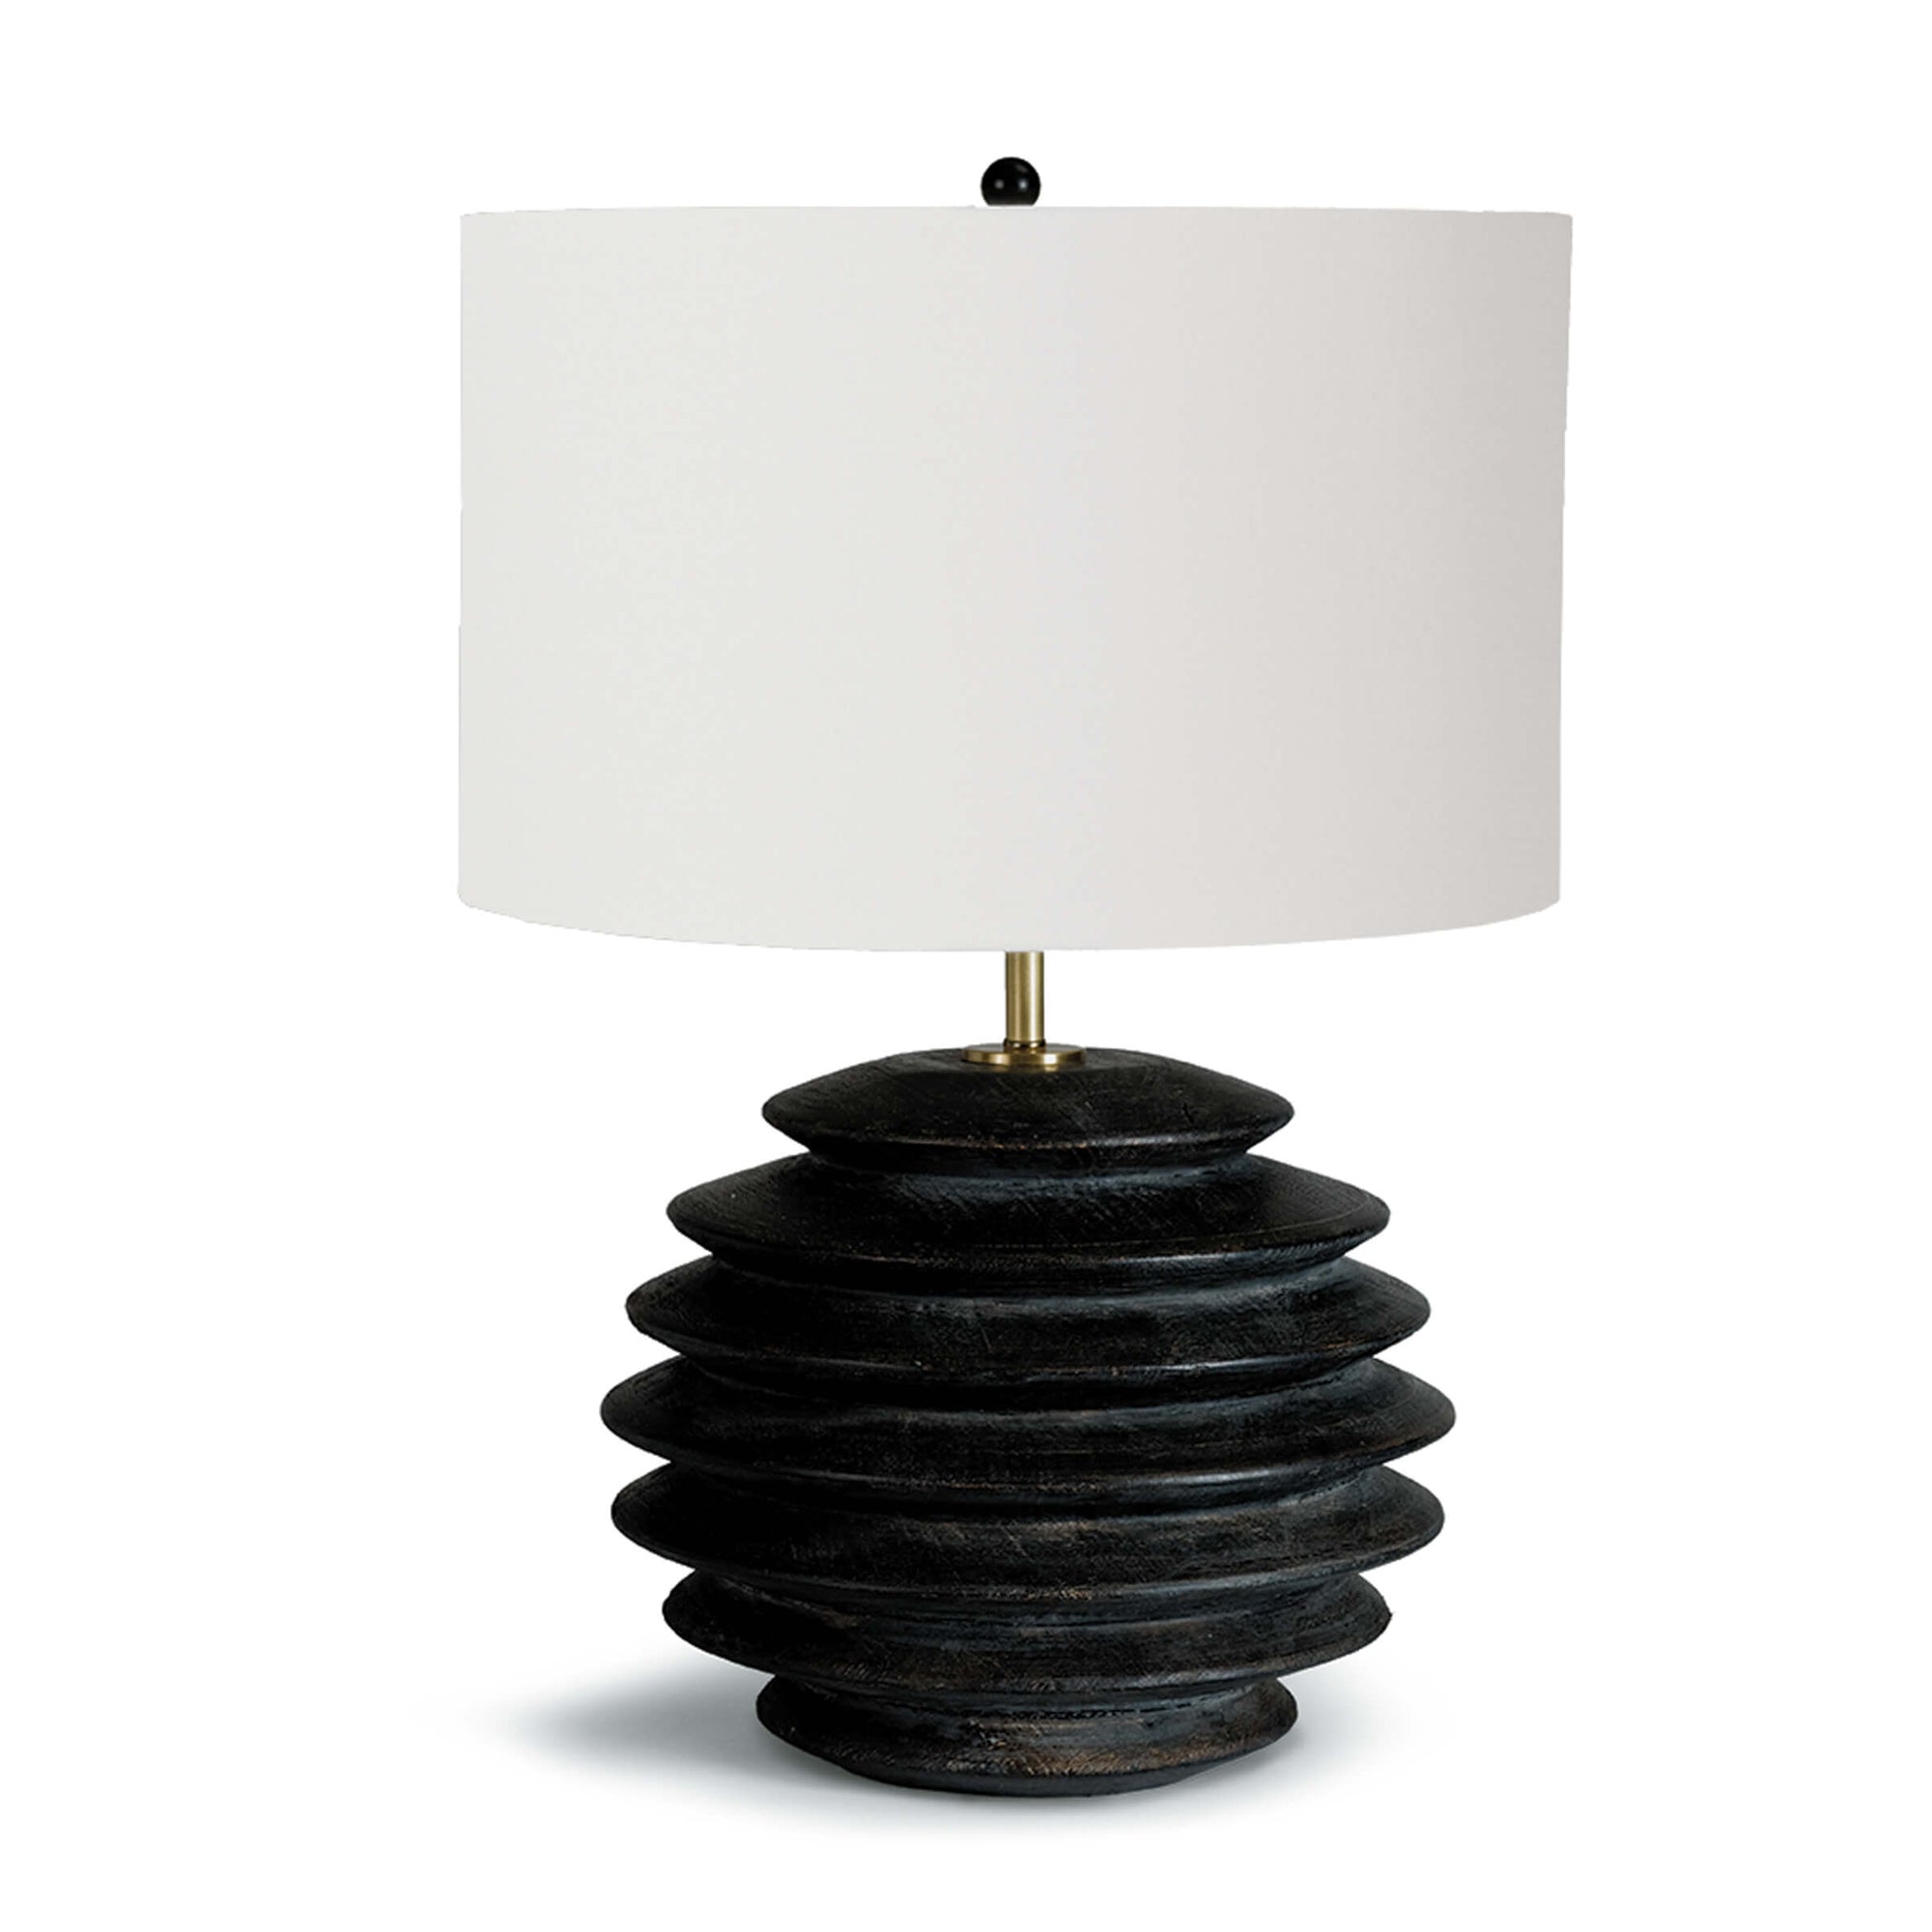 Accordion Table Lamp Round | Best Accordion Table Lamp Round